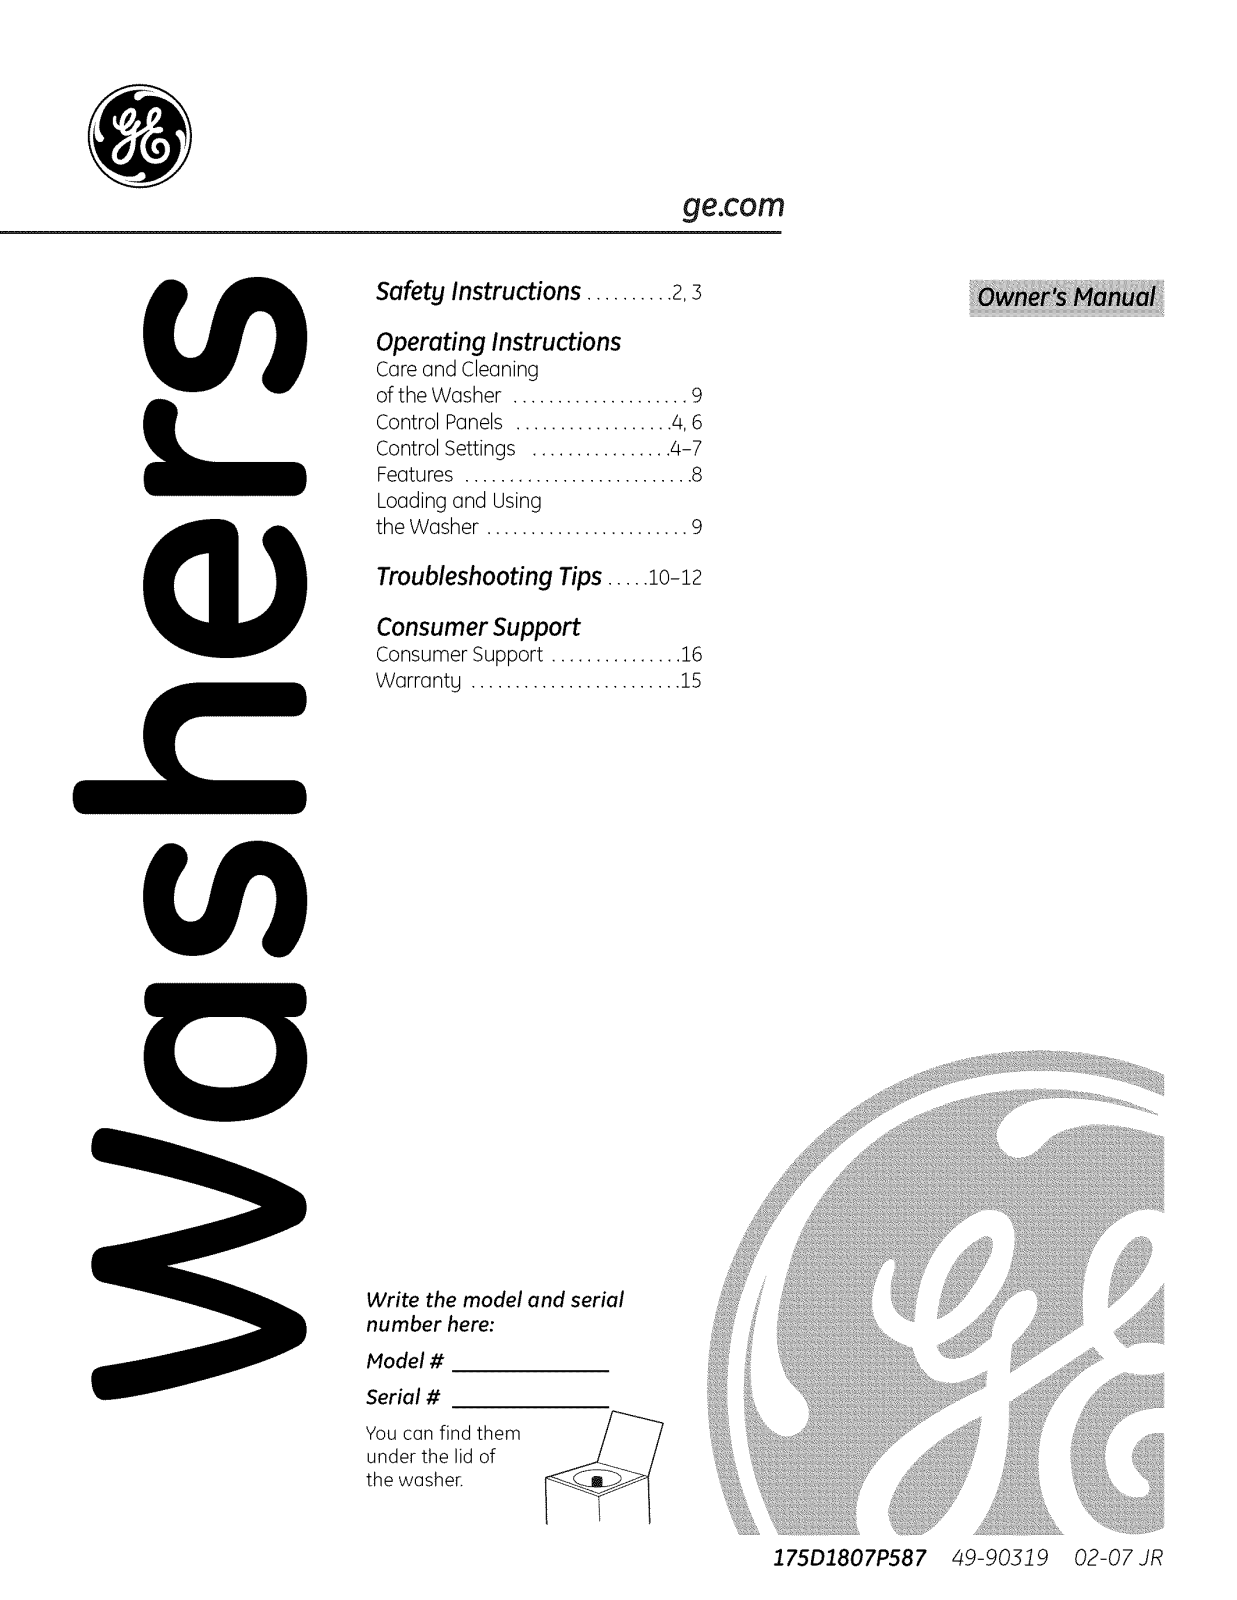 GE WVSR1060G6WW, WVSR1060G3WW, WLSR2200J5WW, WLSR2200J3WW, WLSR2000G5WW Owner’s Manual